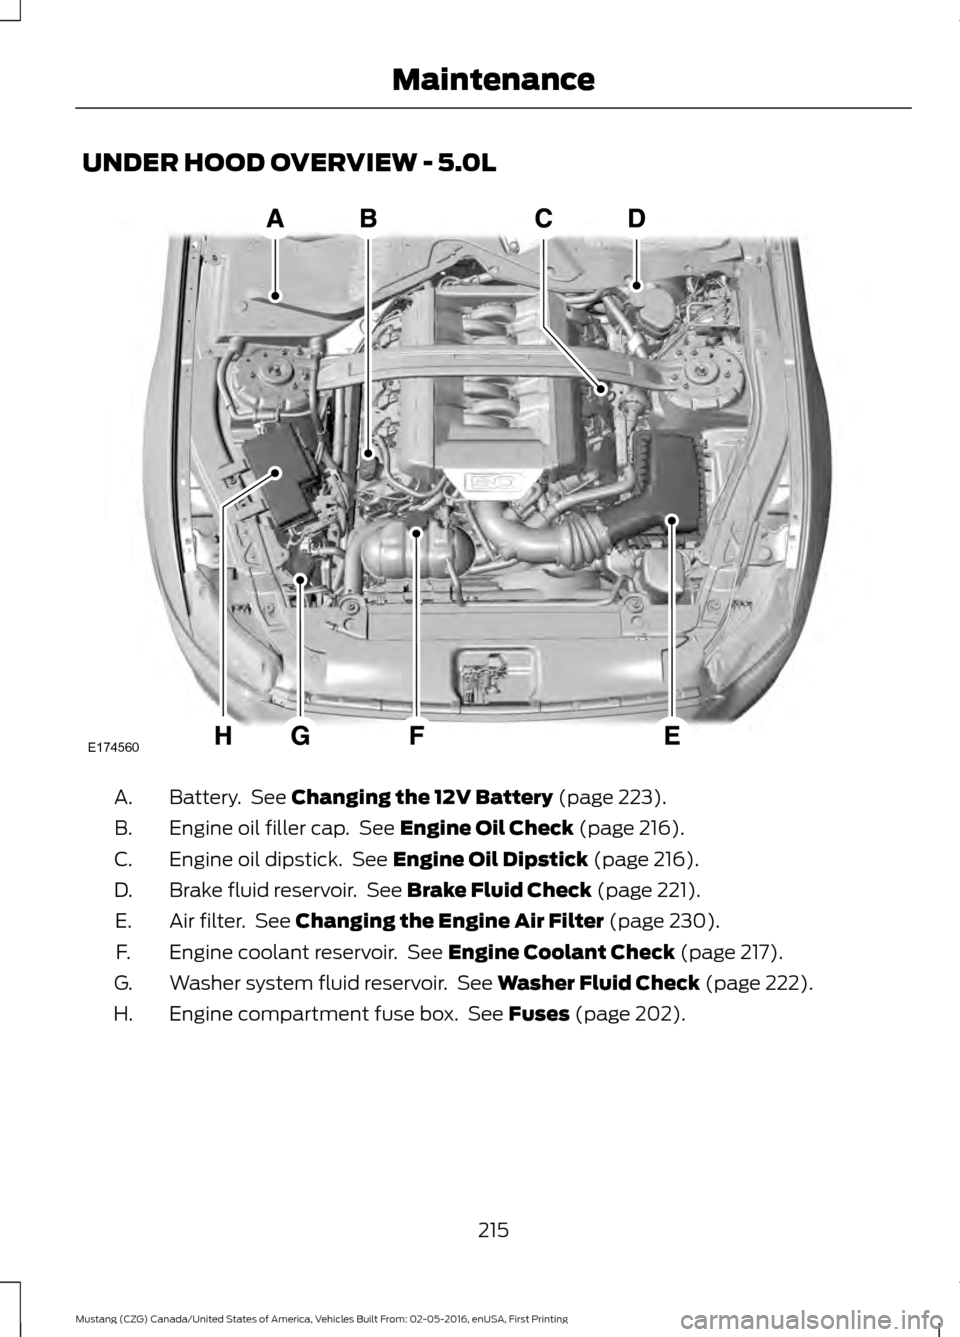 FORD MUSTANG 2017 6.G Owners Manual UNDER HOOD OVERVIEW - 5.0L
Battery.  See Changing the 12V Battery (page 223).
A.
Engine oil filler cap.  See 
Engine Oil Check (page 216).
B.
Engine oil dipstick.  See 
Engine Oil Dipstick (page 216).